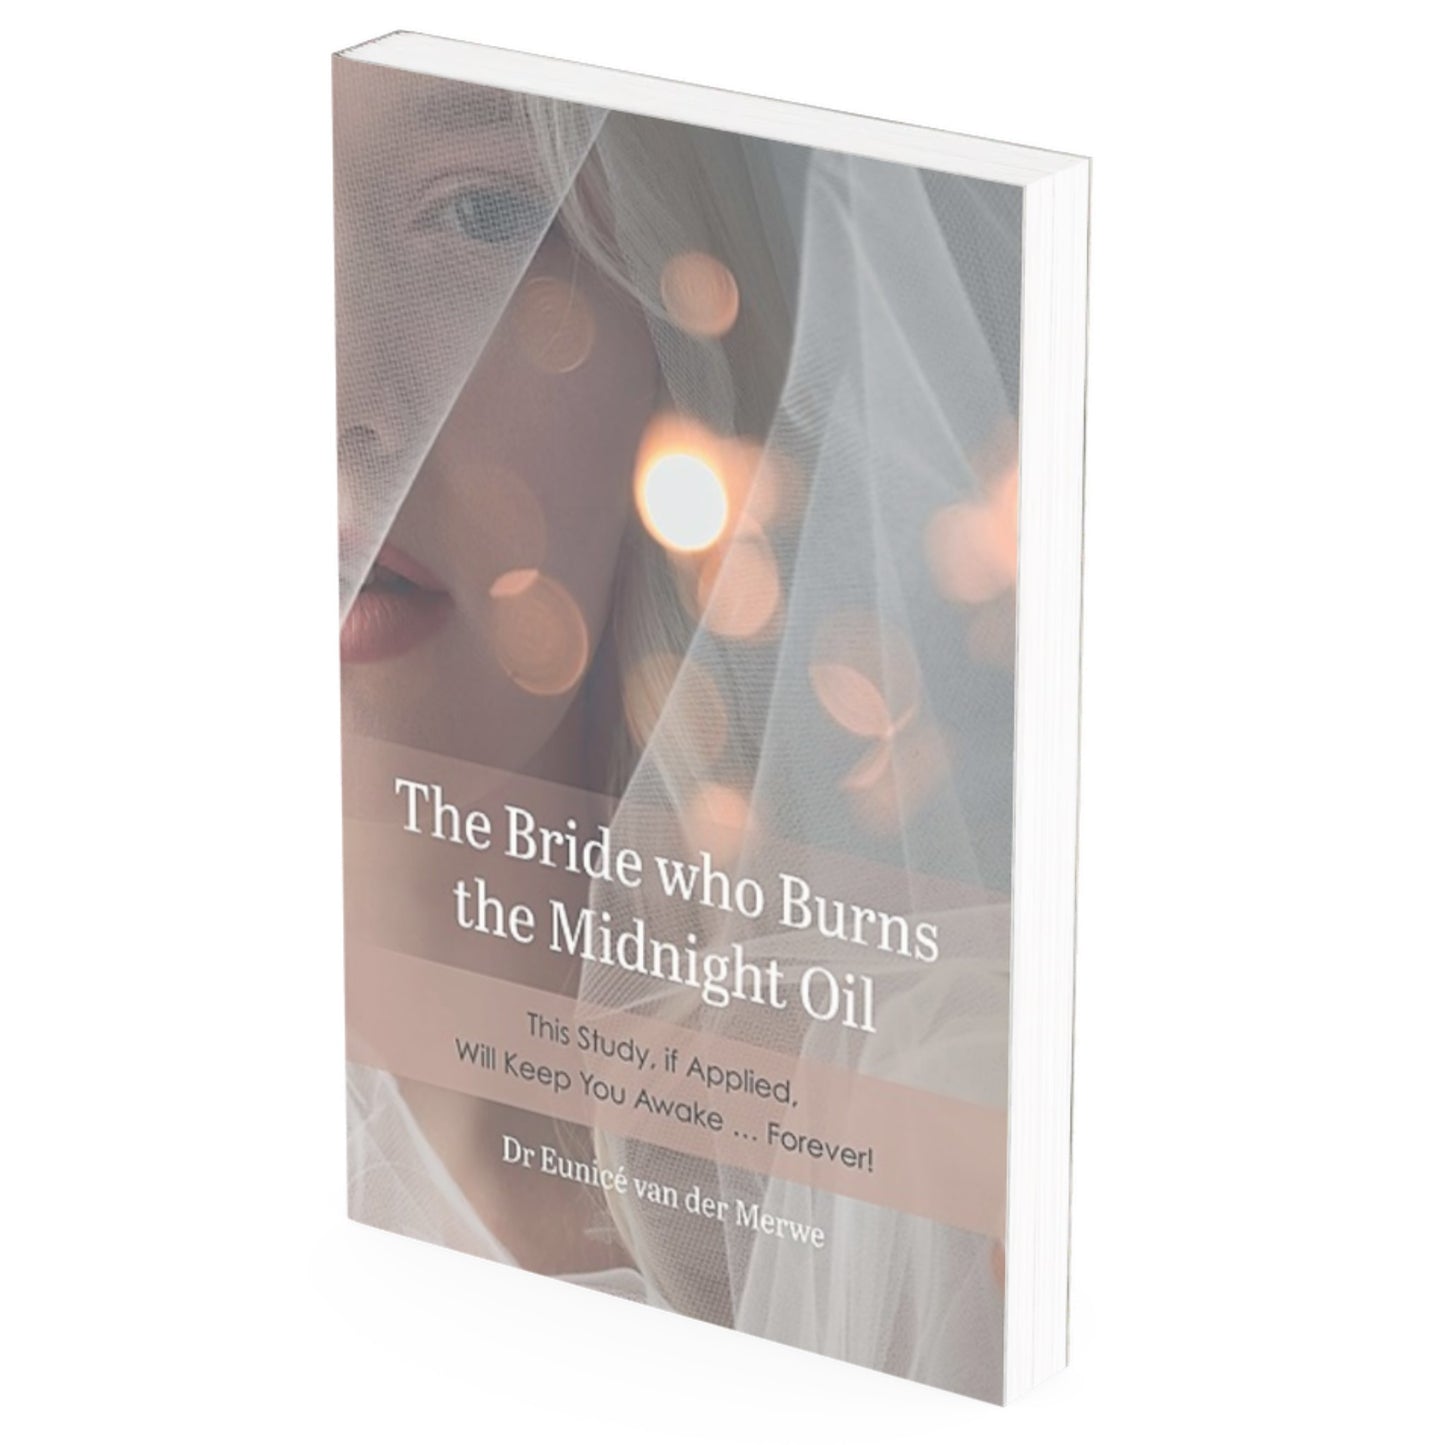 The Bride who Burns the Midnight Oil